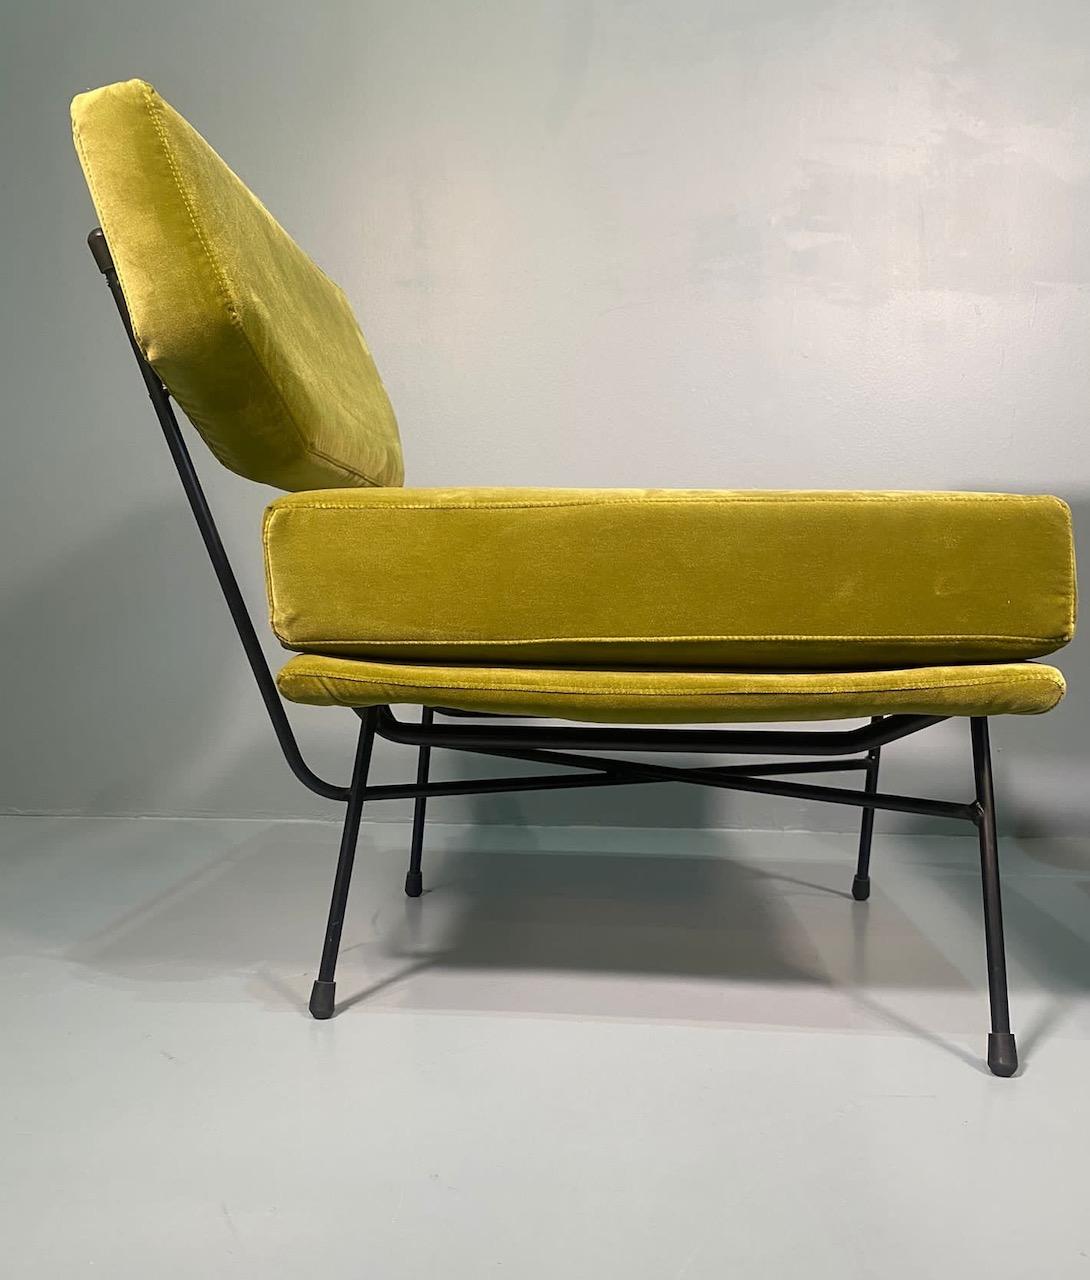 Pair of 'Elettra' Lounge Chairs by BBPR, Arflex, Italy 1953, Compasso D'Oro 1954 For Sale 12